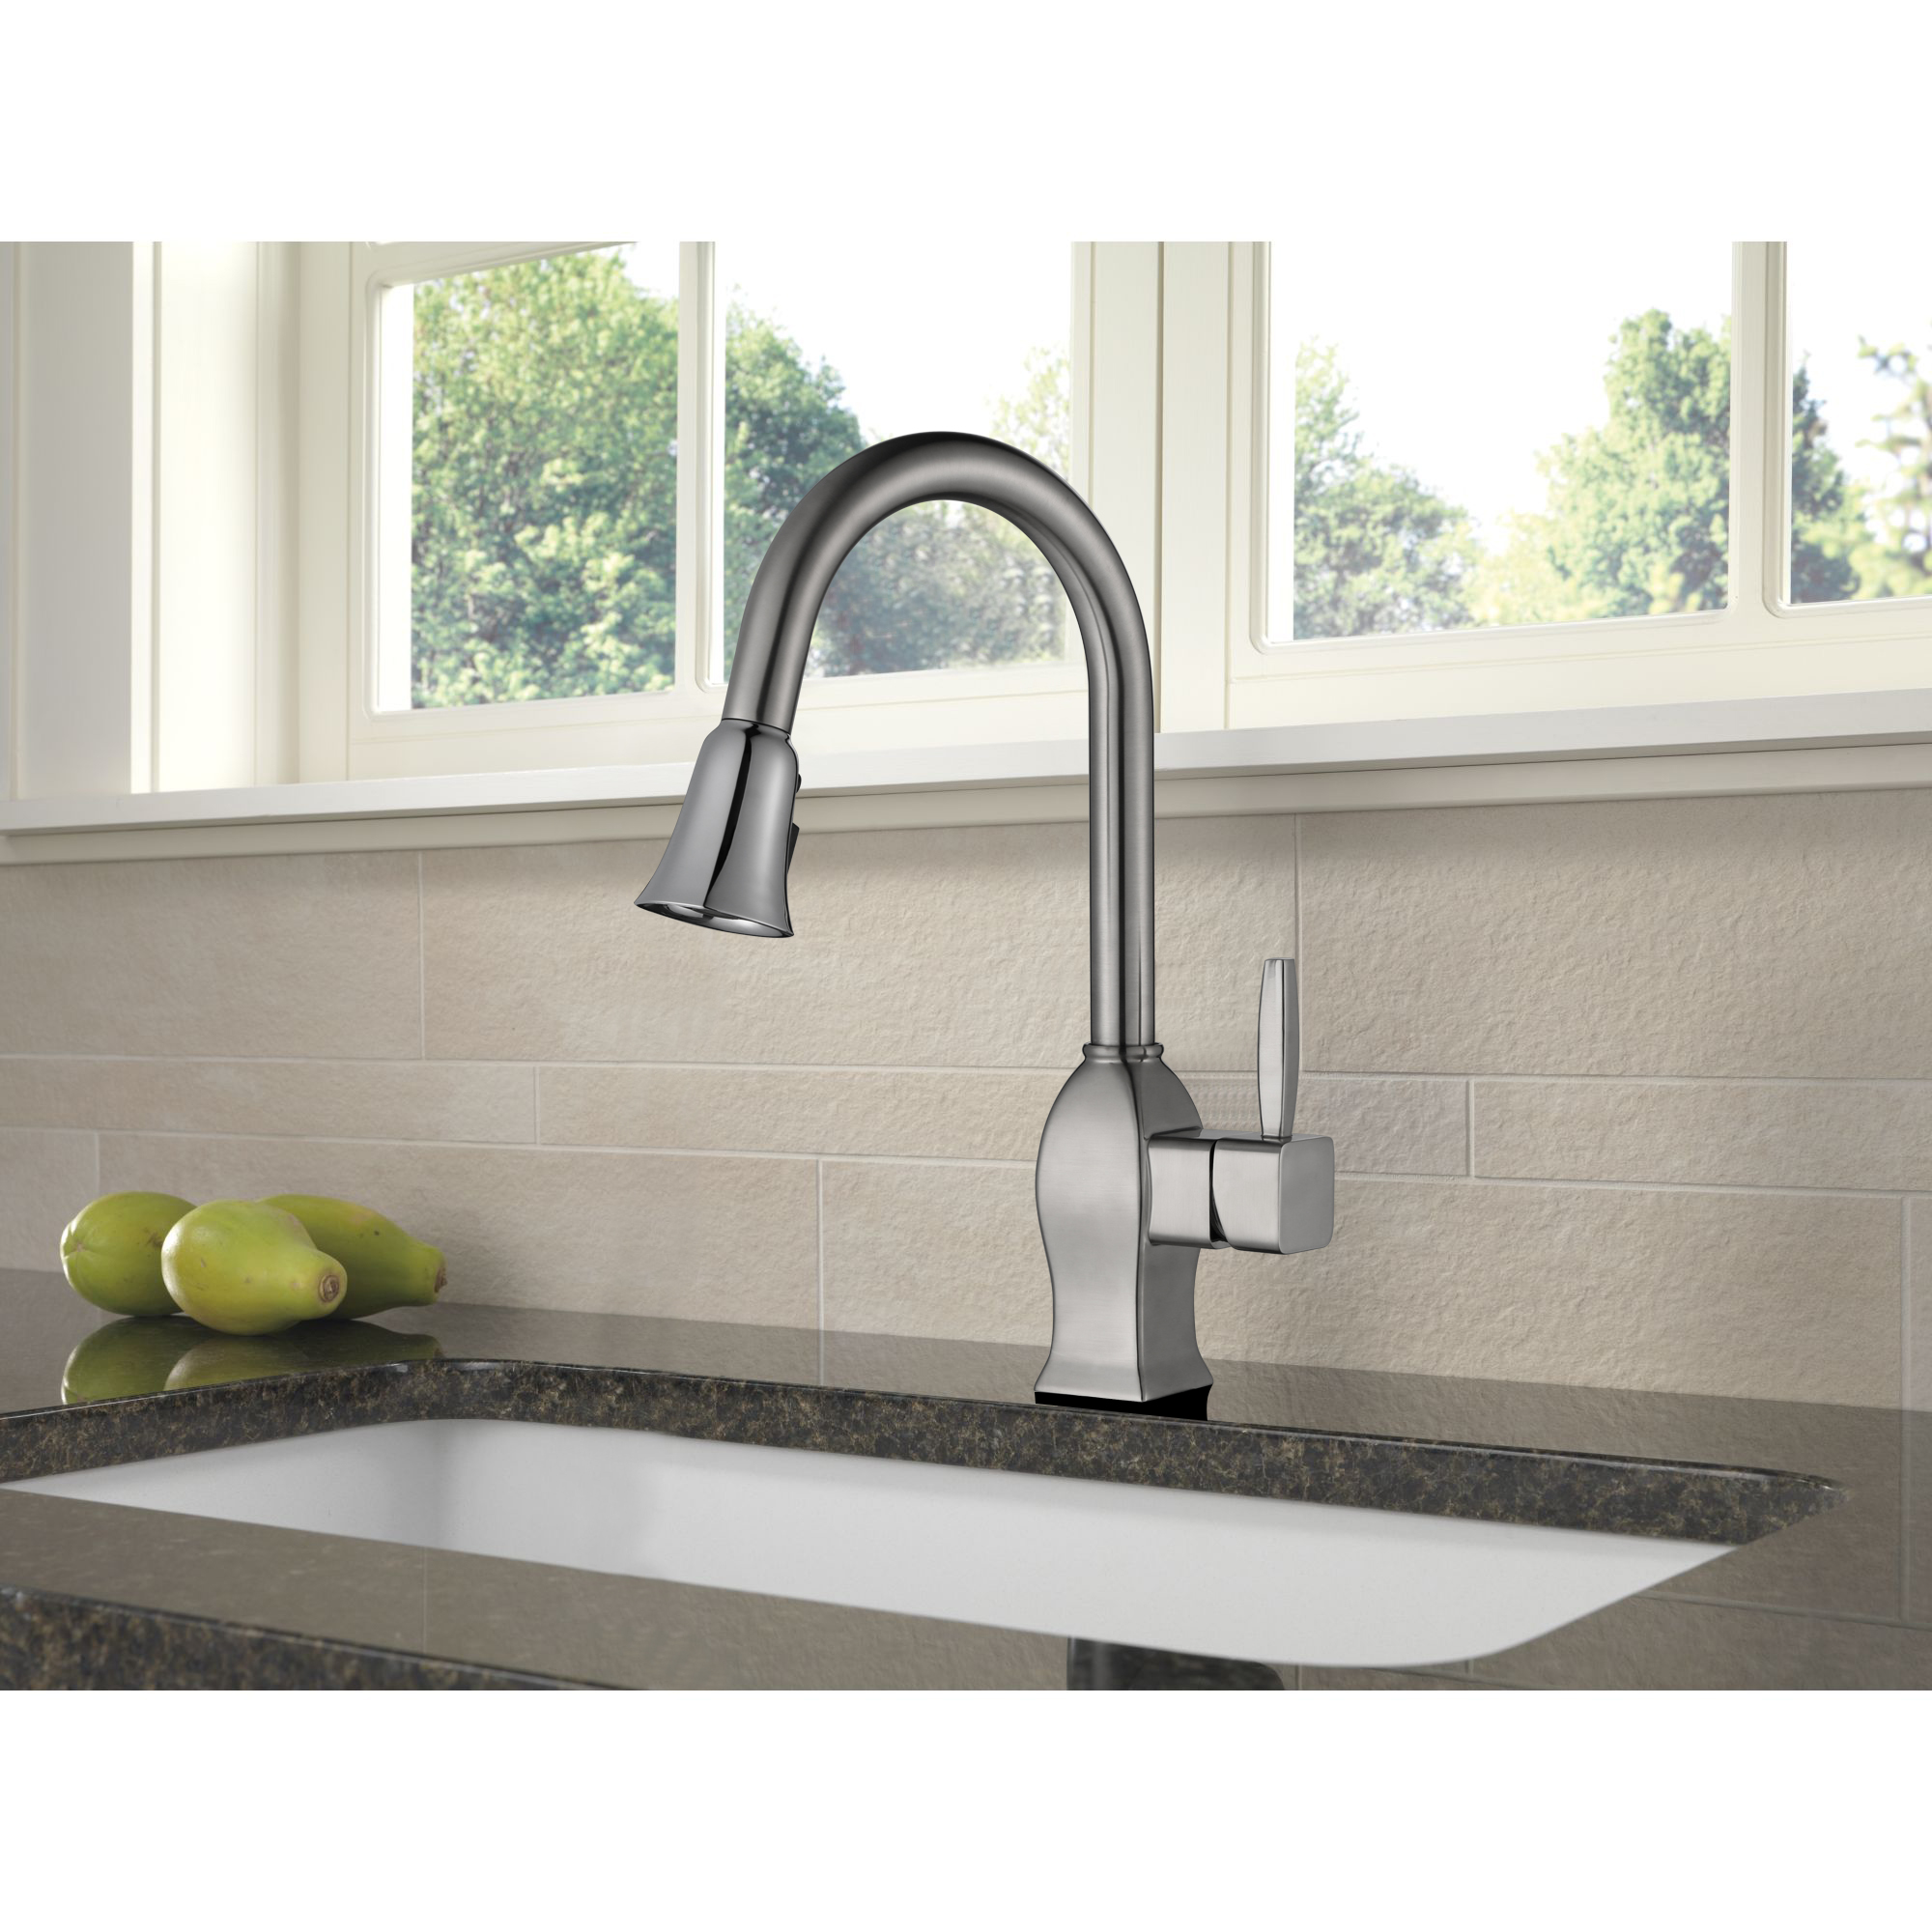 Single Handle Kitchen Faucet Pull Down Kitchen Faucet Brushed Nickel Kitchen Faucet